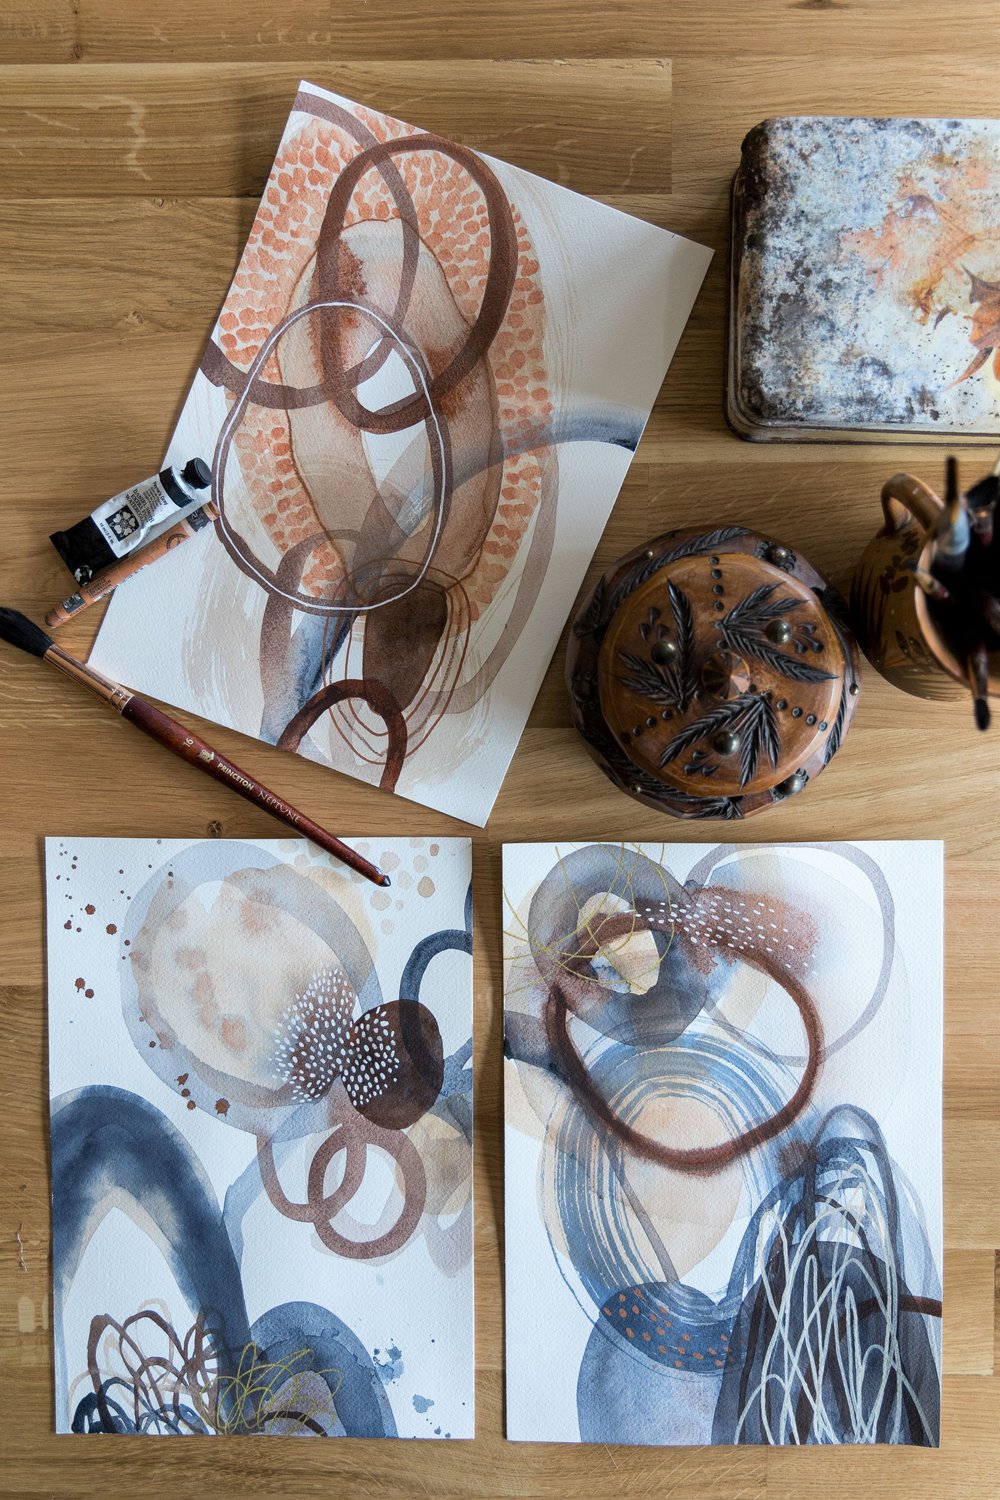  Bird’s eye view of three abstract paintings and some art supplies on a wooden table.  